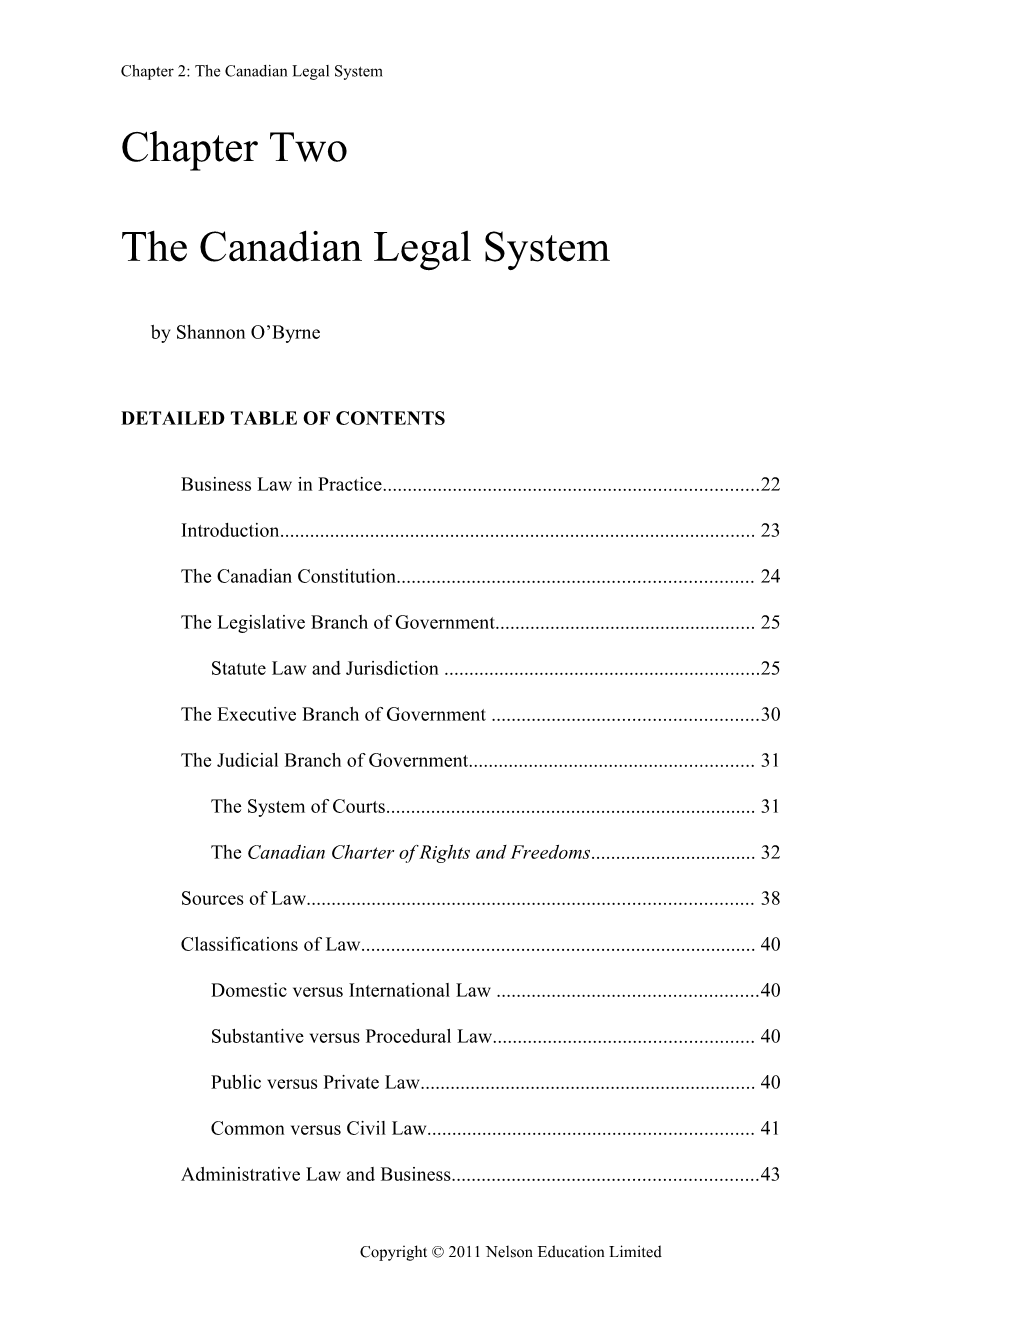 The Canadian Legal System